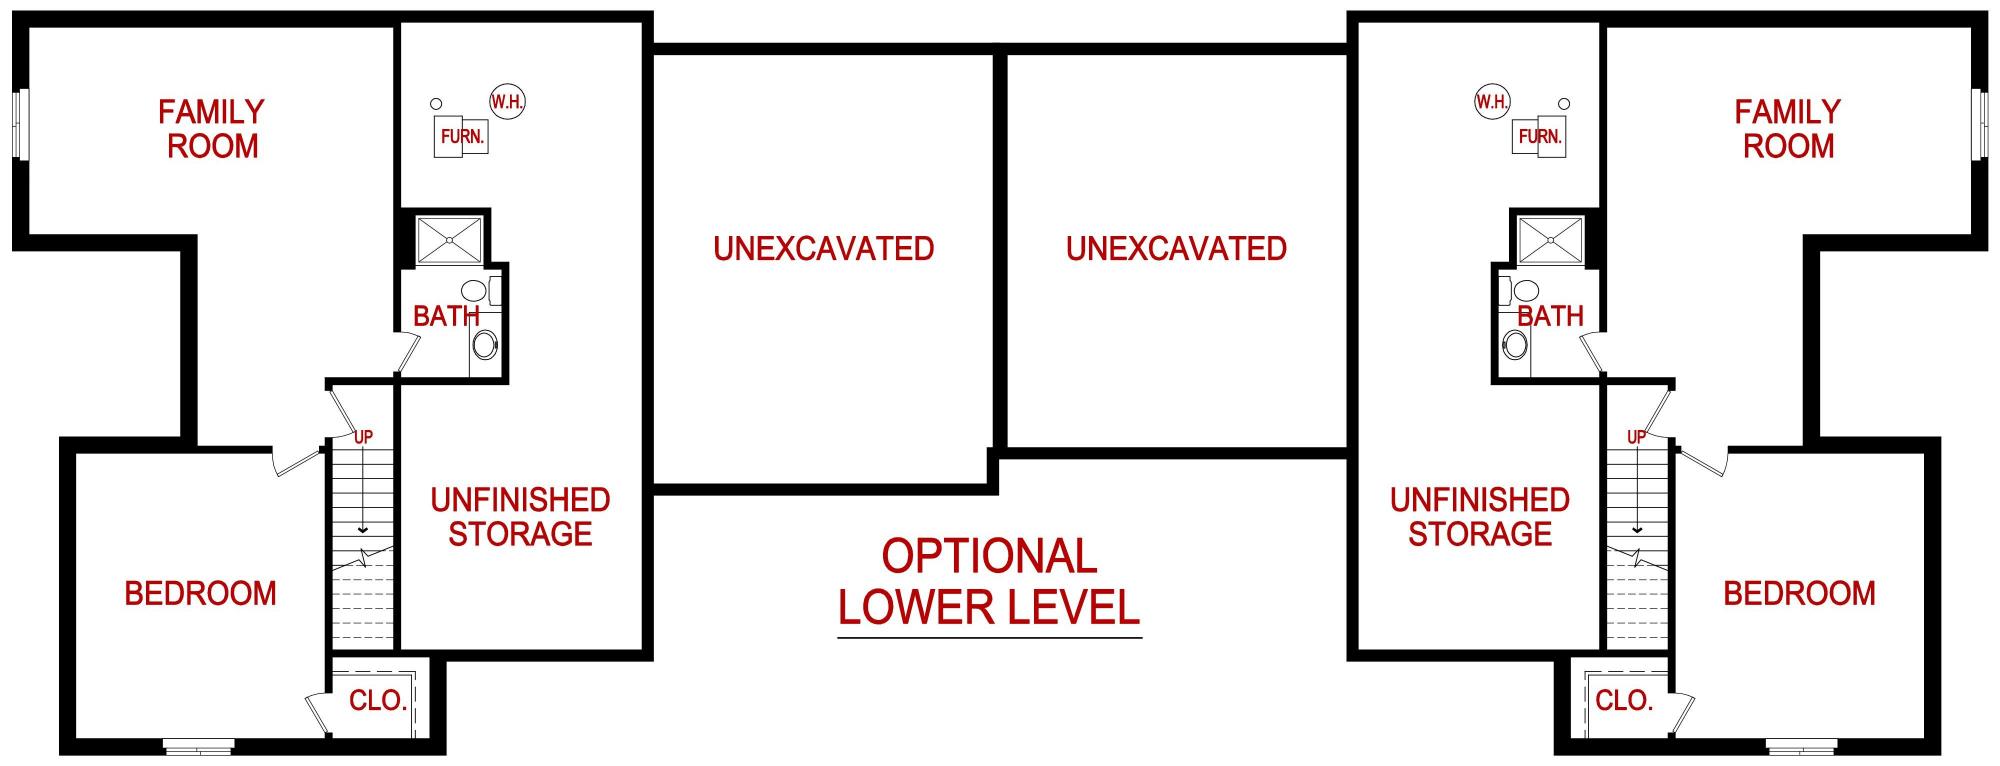 Optional lower level floor plan of a Todd model from Lambie custom homes